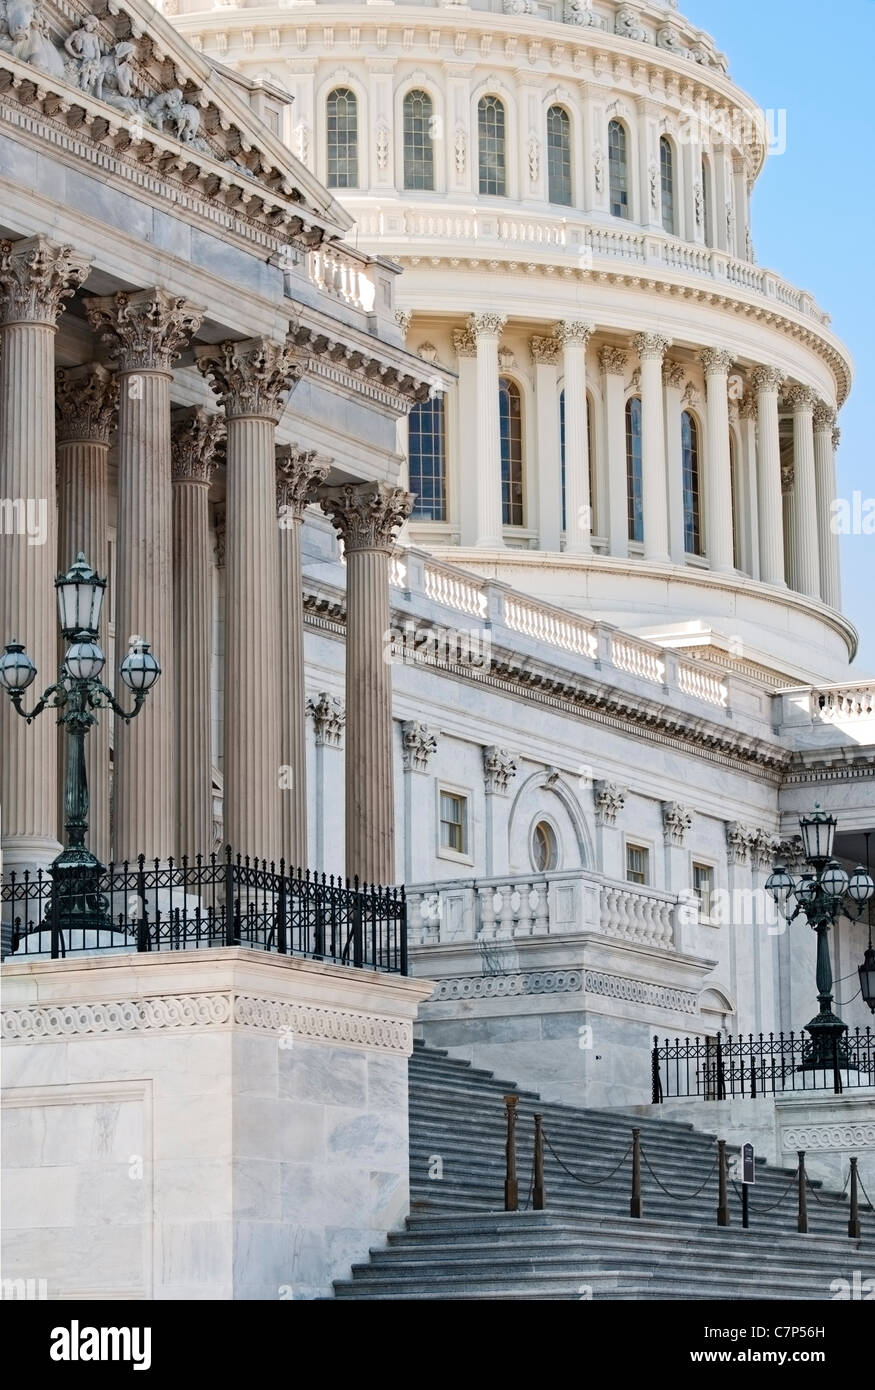 A partial exterior view of the US Capitol Building with columns, east wing view Stock Photo